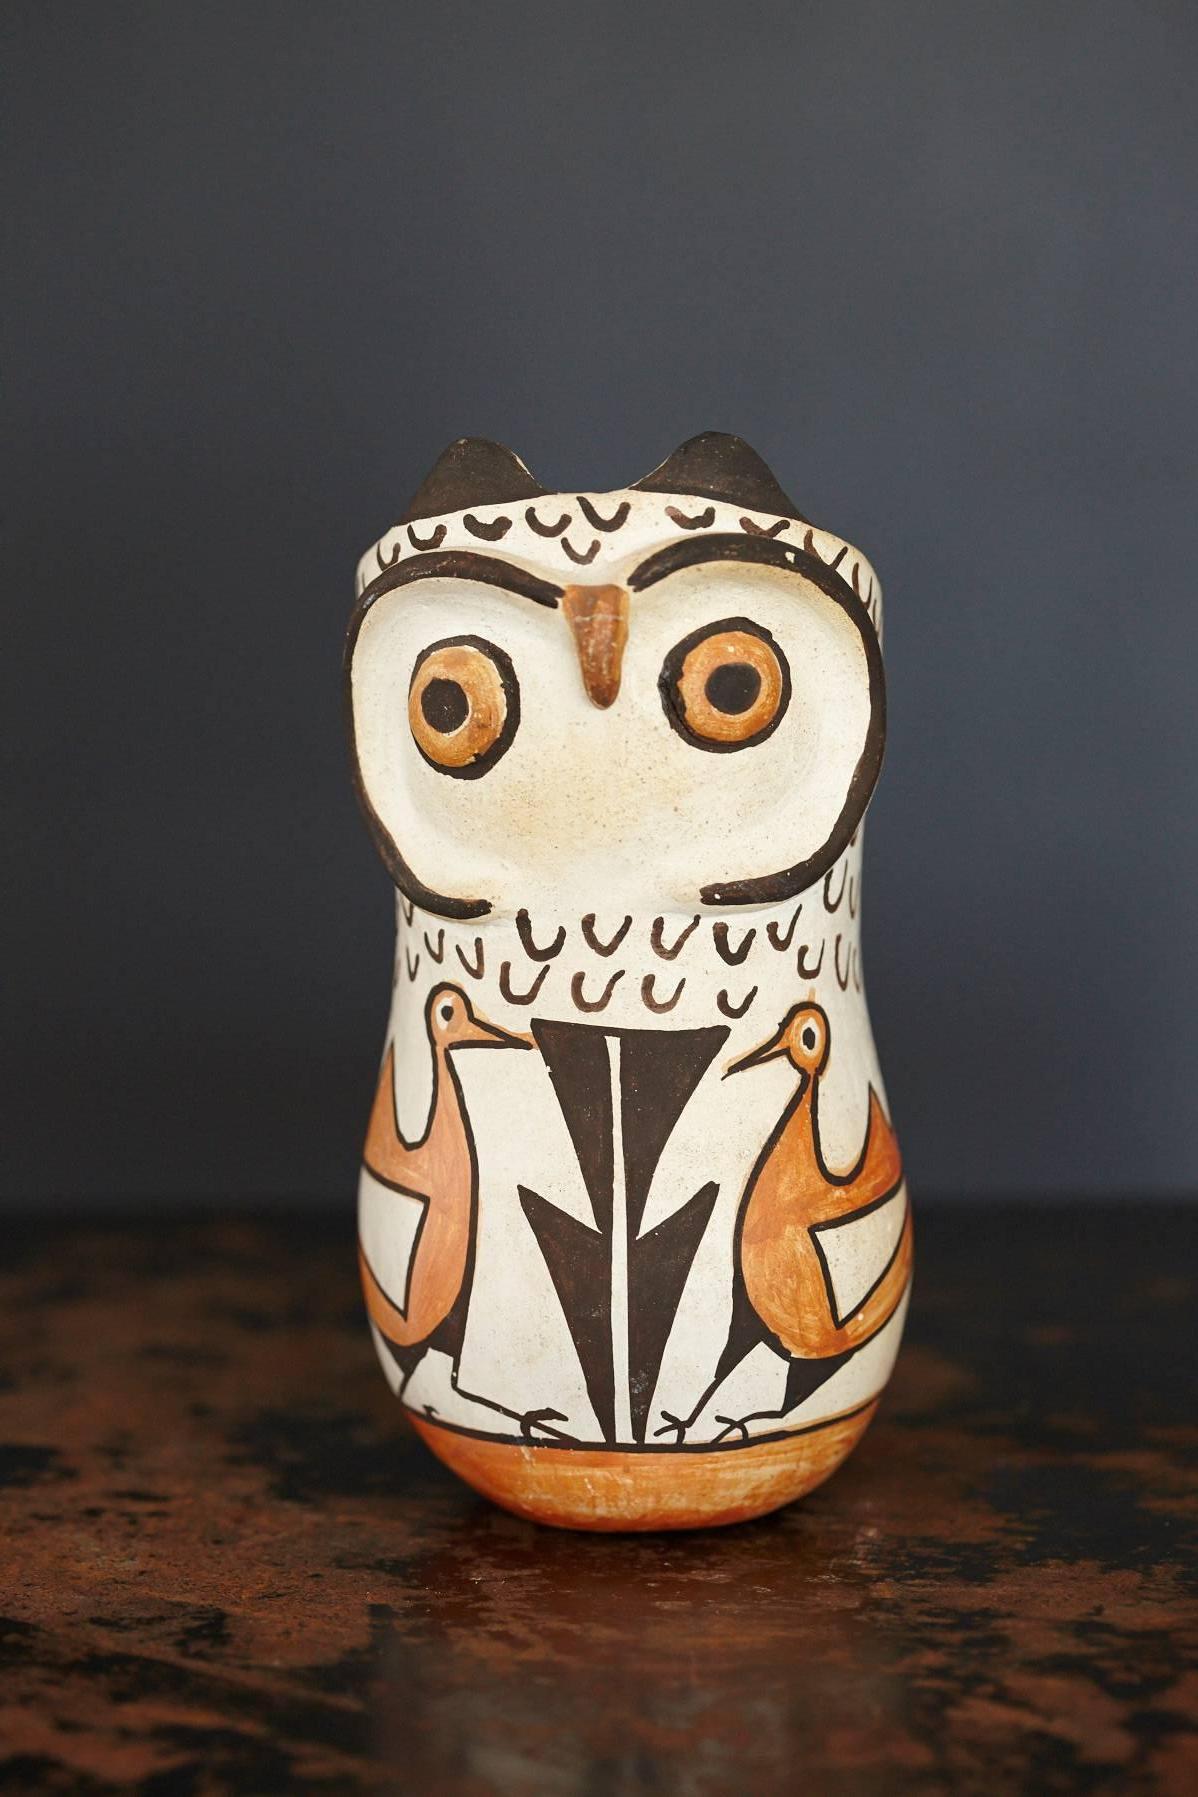 Outstanding Acoma polychromed earthenware owl jar by Frances Torivio, New Mexico, circa 1960s.
The piece is signed on the bottom Frances Torivio, Acoma N.M.
The piece is in good condition and has a small repair on the nose of the owl., otherwise